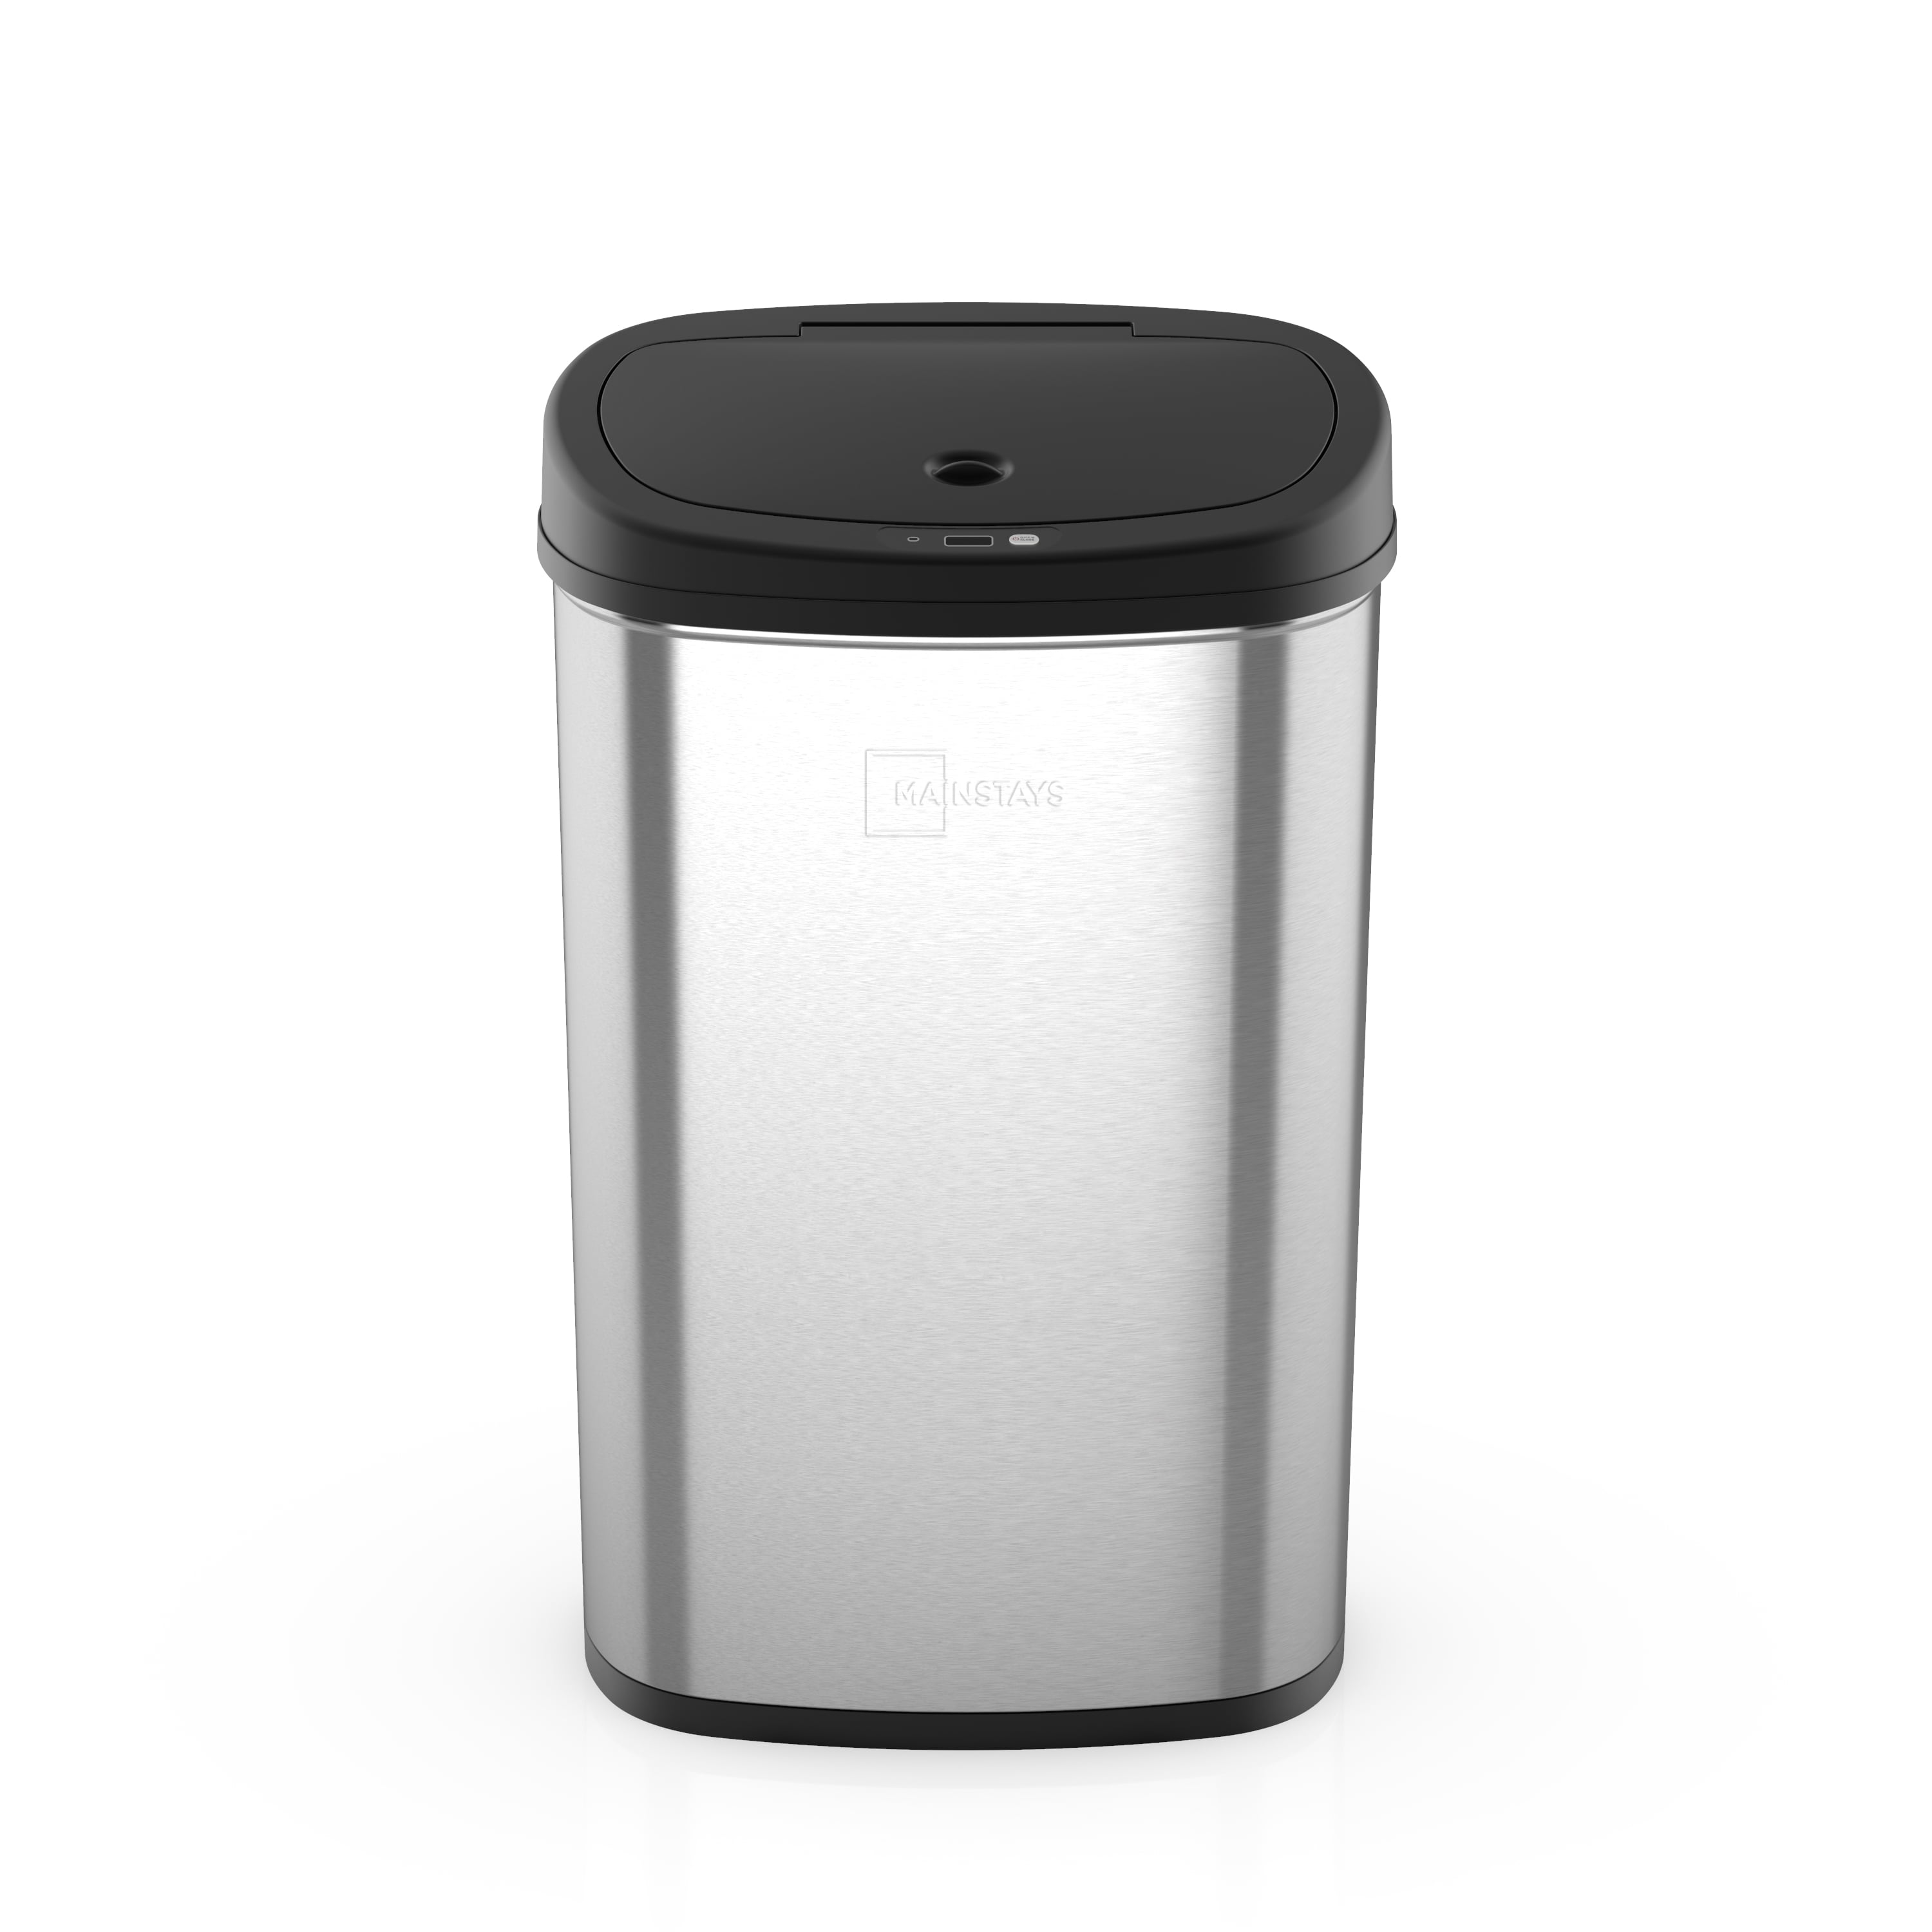 Mainstay MS-50-22 Motion Sensor Trash Can Stainless Steel 13.2 Gallon 